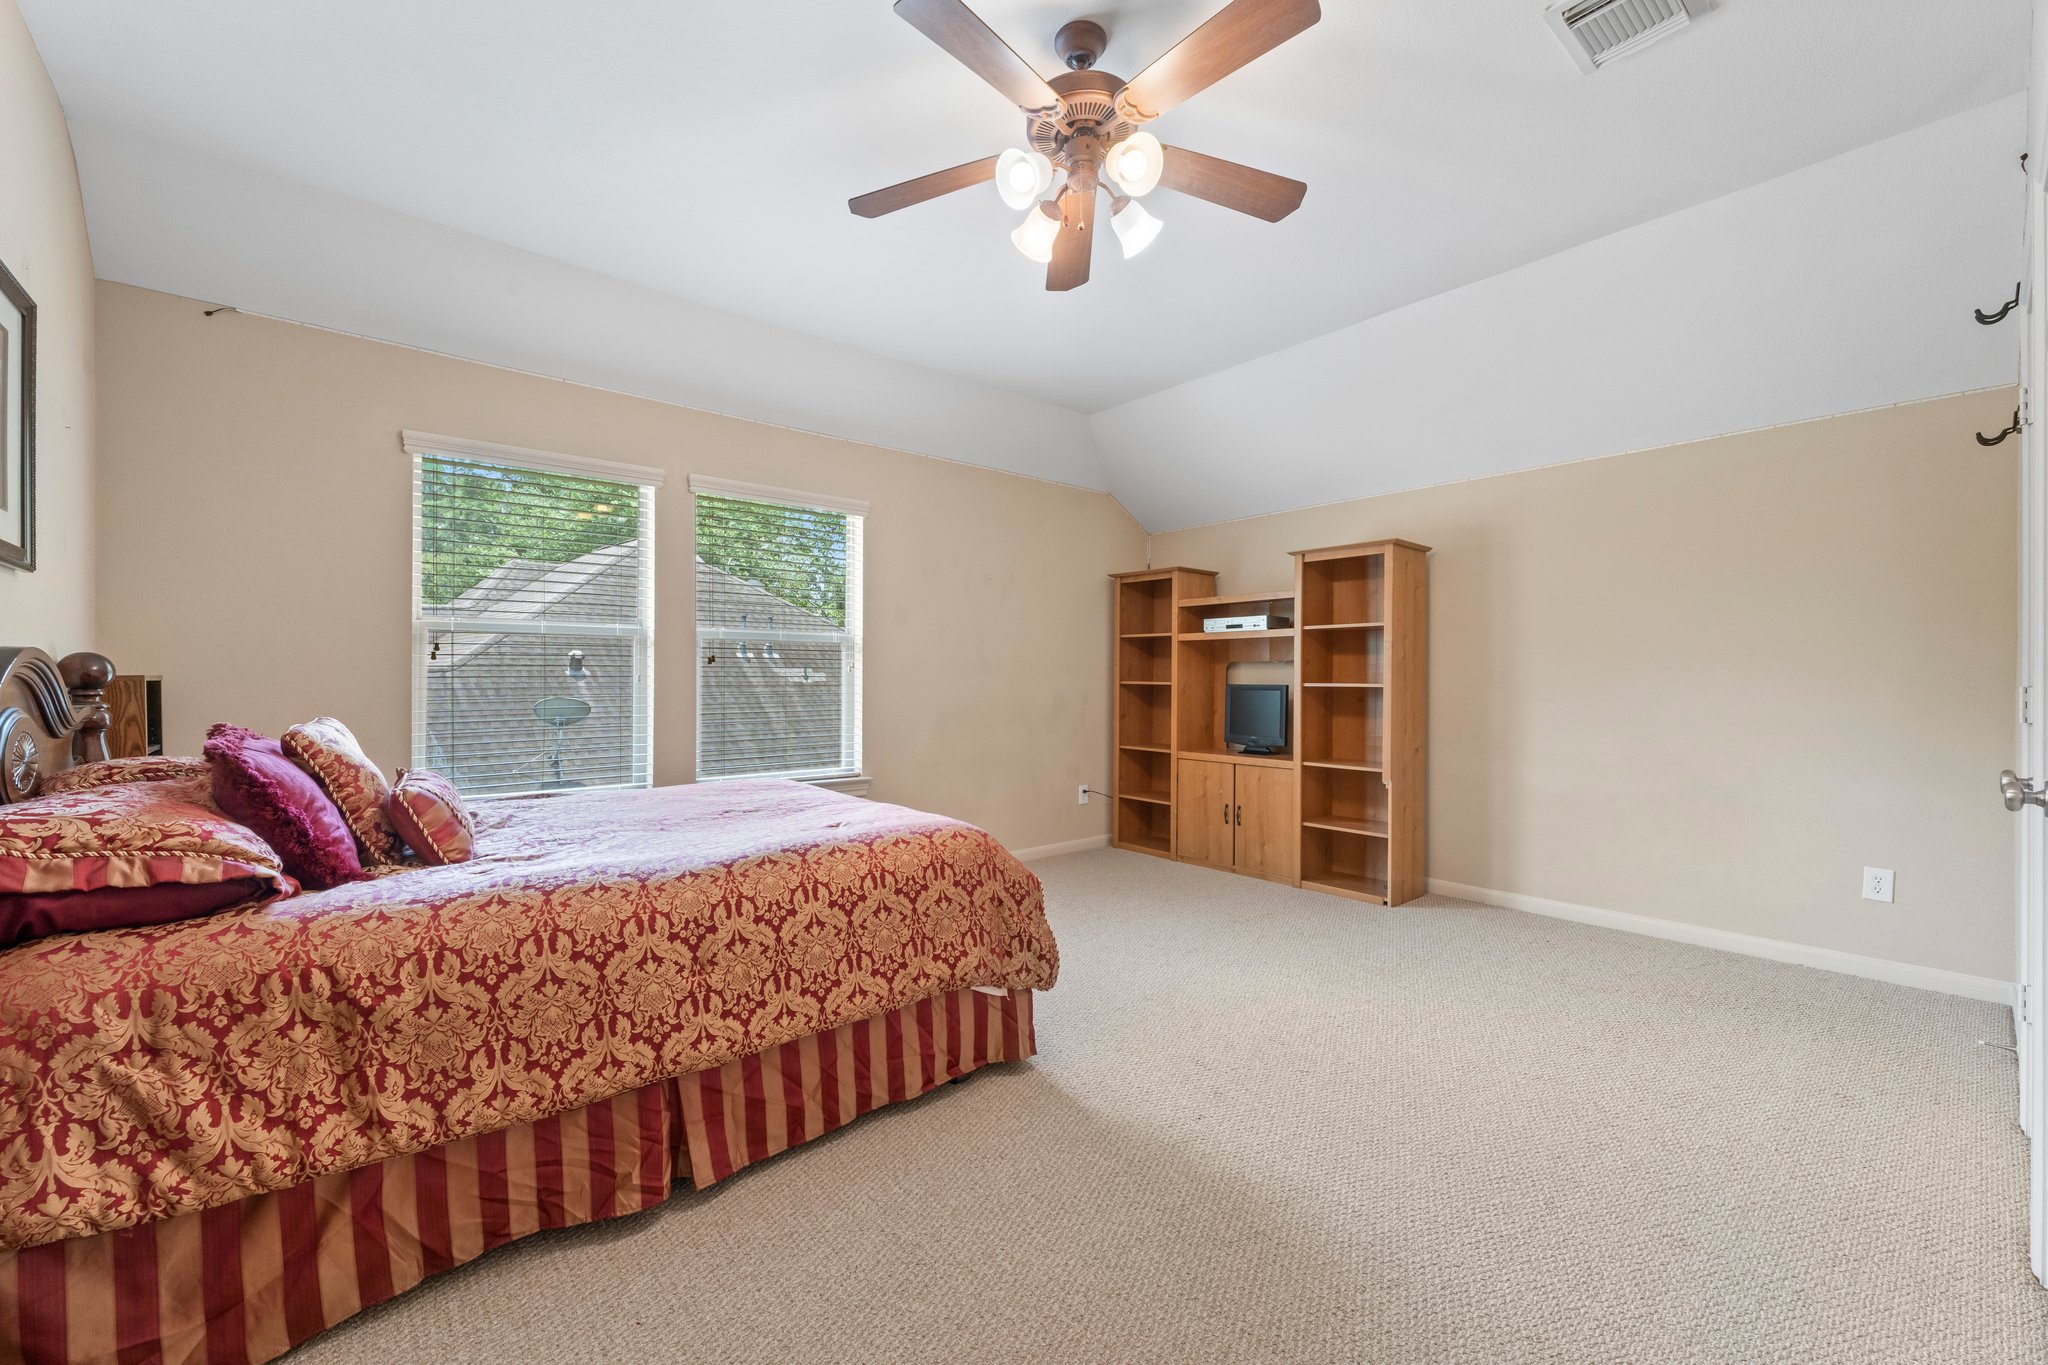 Secondary bedroom with large windows, ceiling fan, double walk-in closet, attic access, and full bath access door.